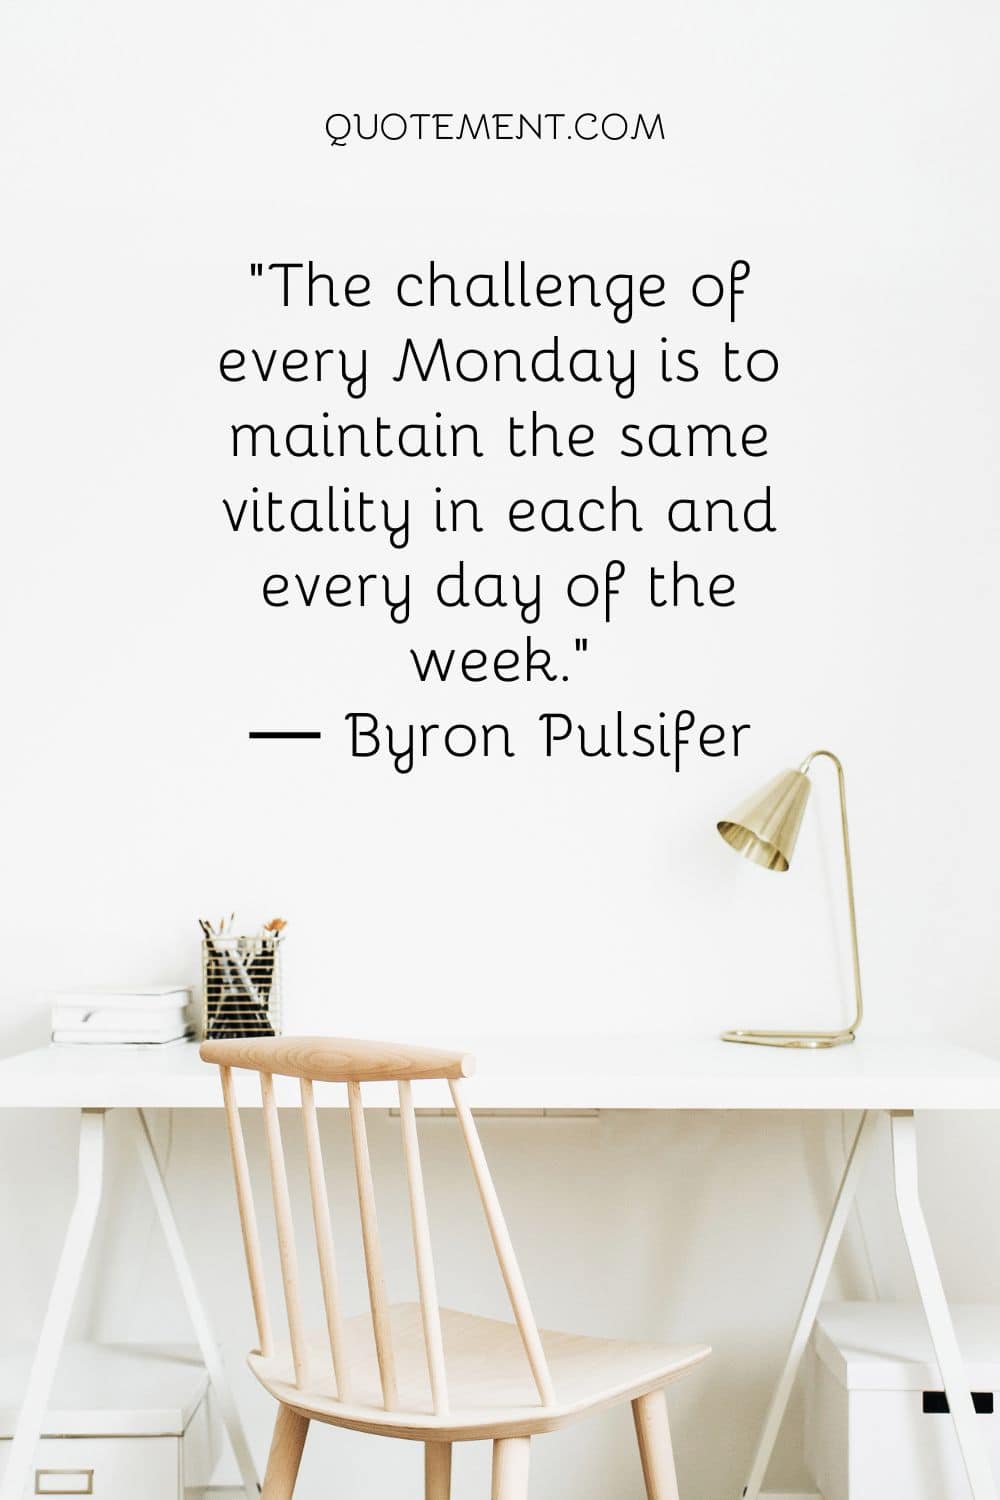 The challenge of every Monday is to maintain the same vitality in each and every day of the week